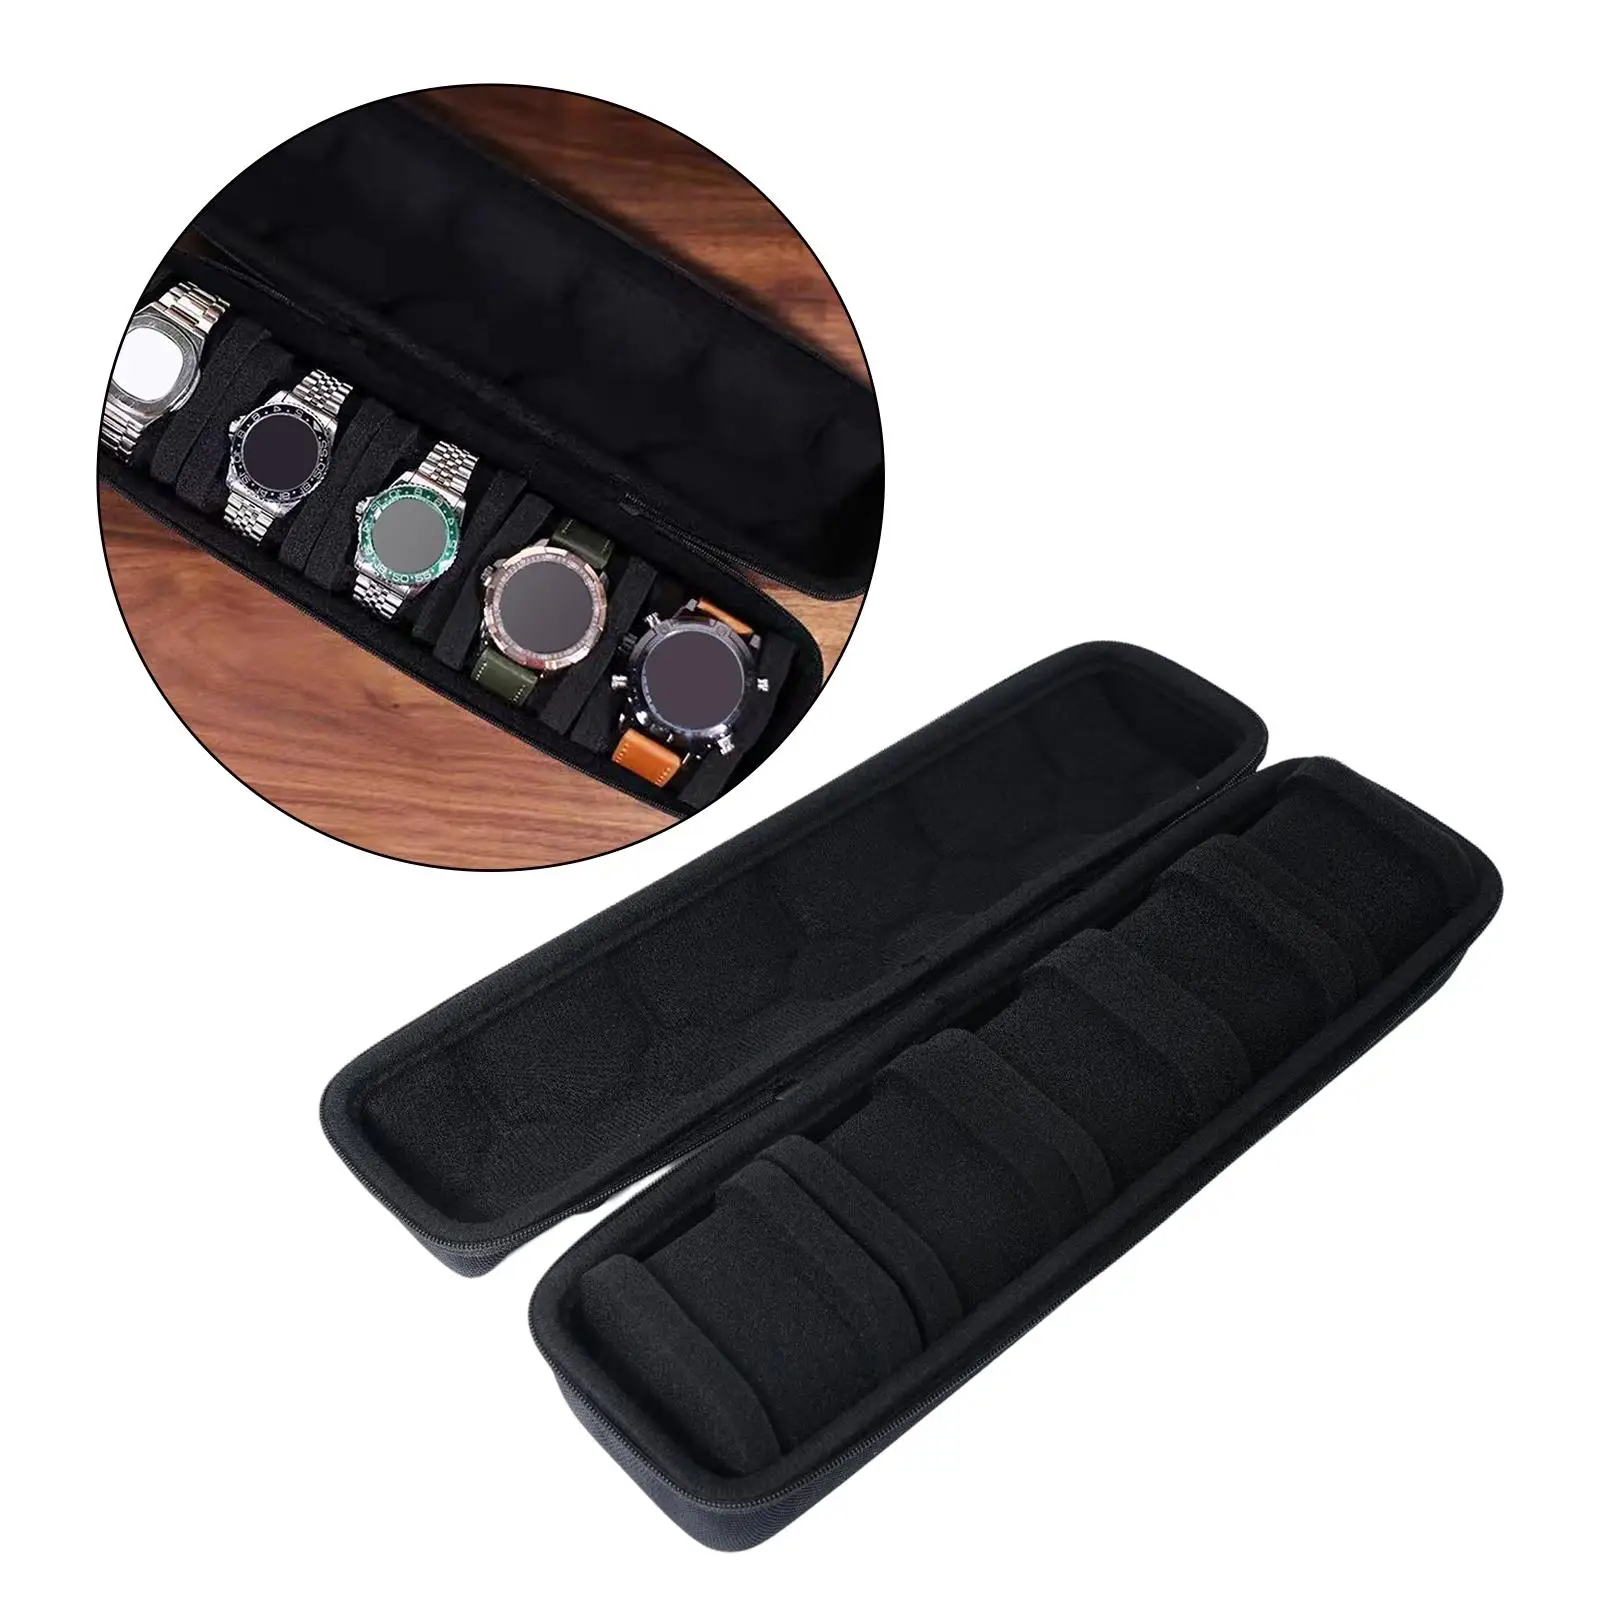 Travel 5 Slot Watch Roll Case, Fashion Large Capacity Space Saving Compact Durable